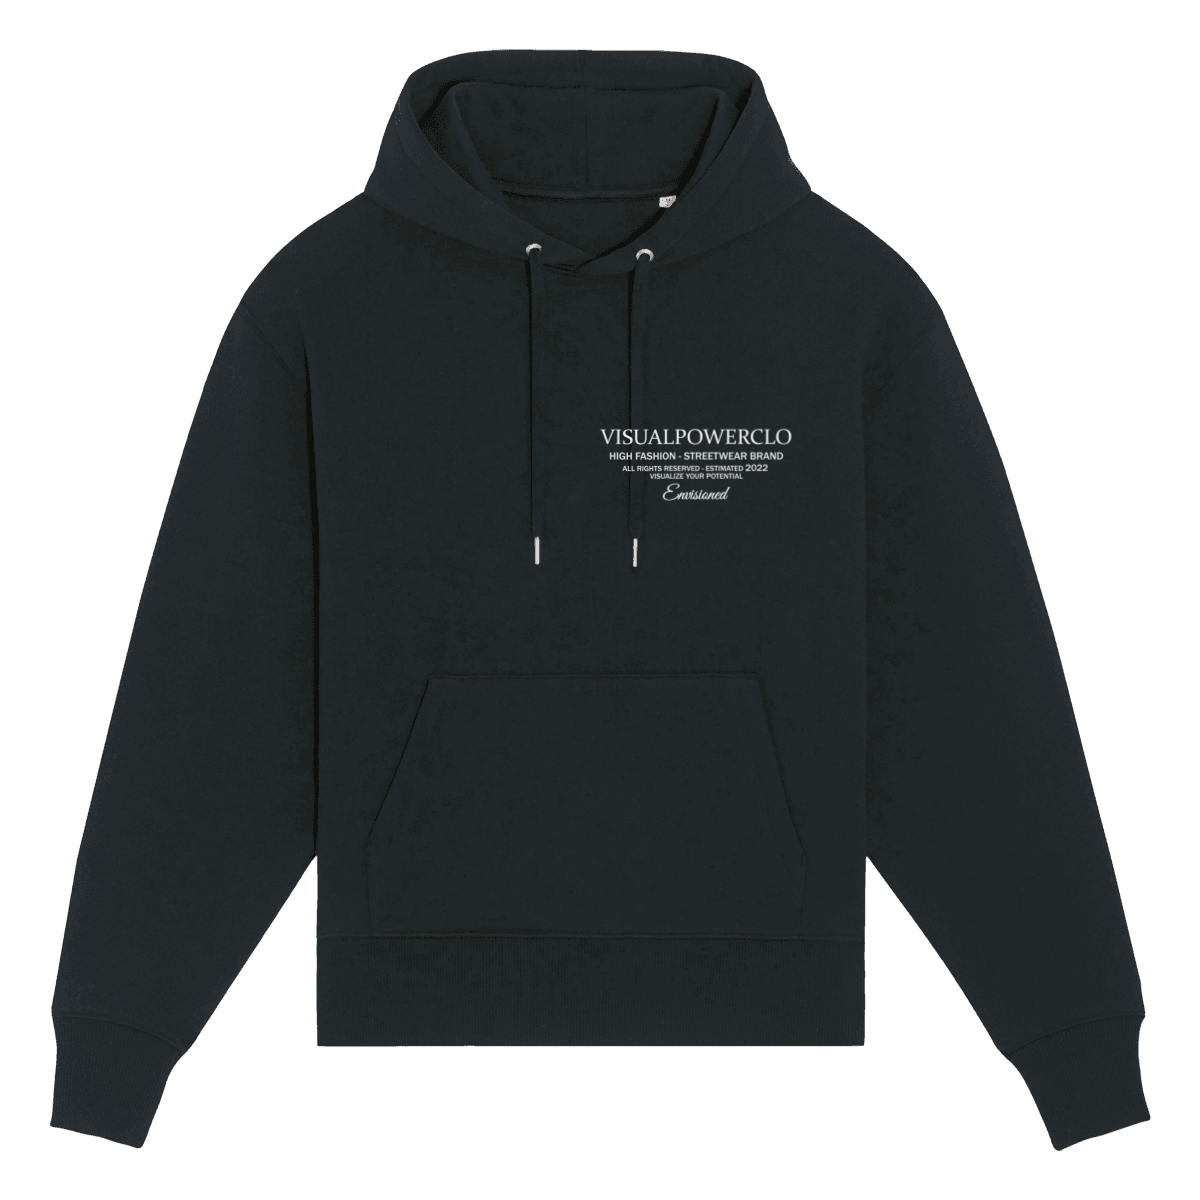 Oversized Hoodie - Envisioned